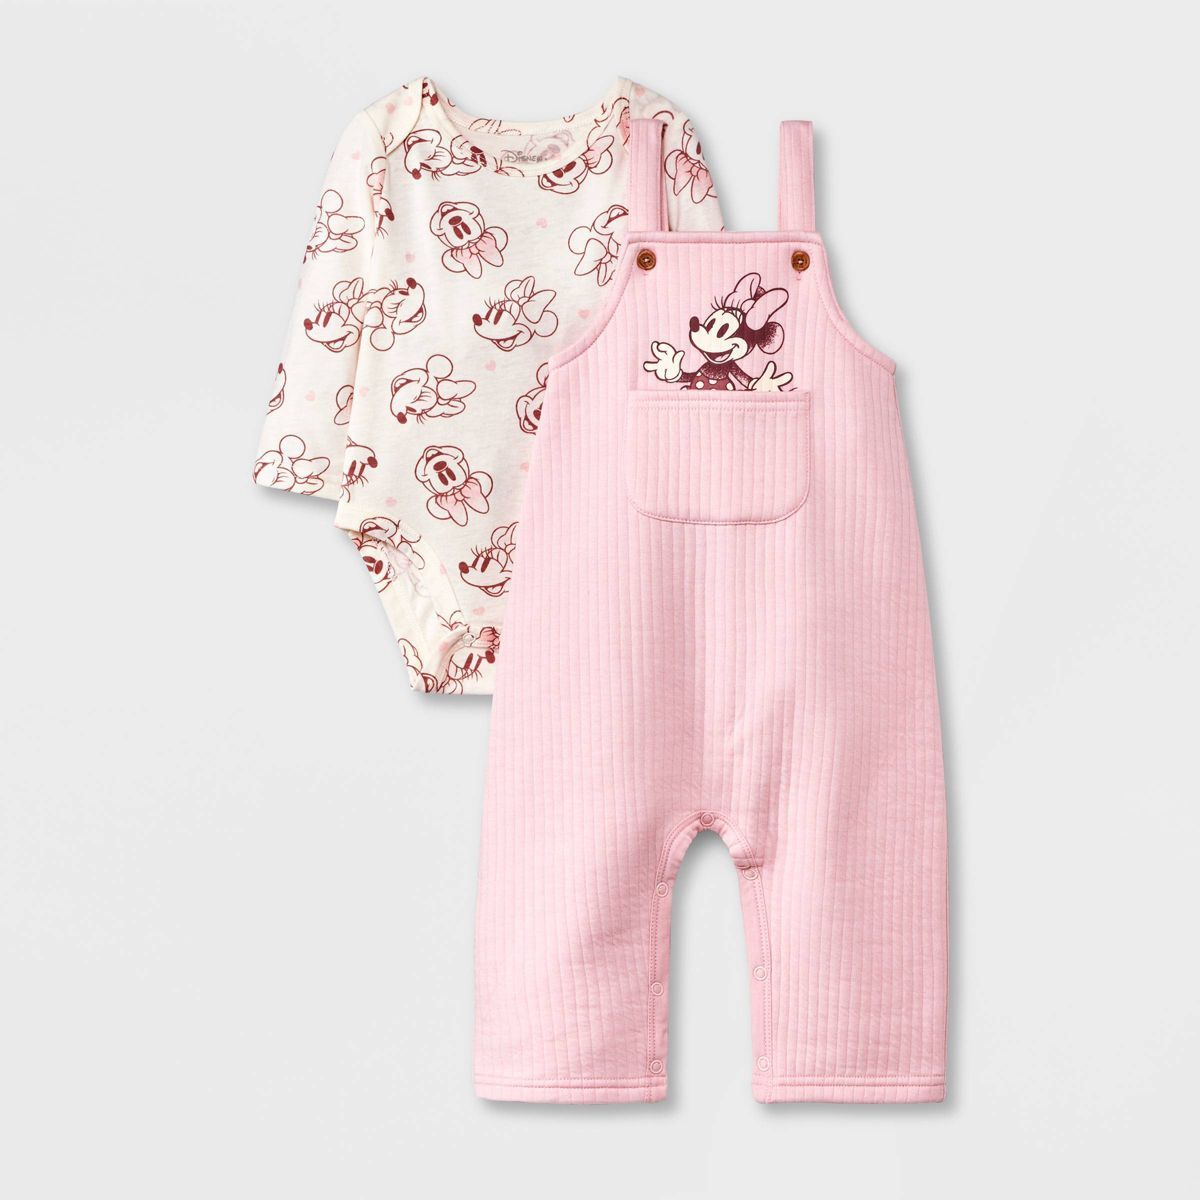 Baby Girls' Disney Minnie Mouse Top and Bottom Set - Pink | Target